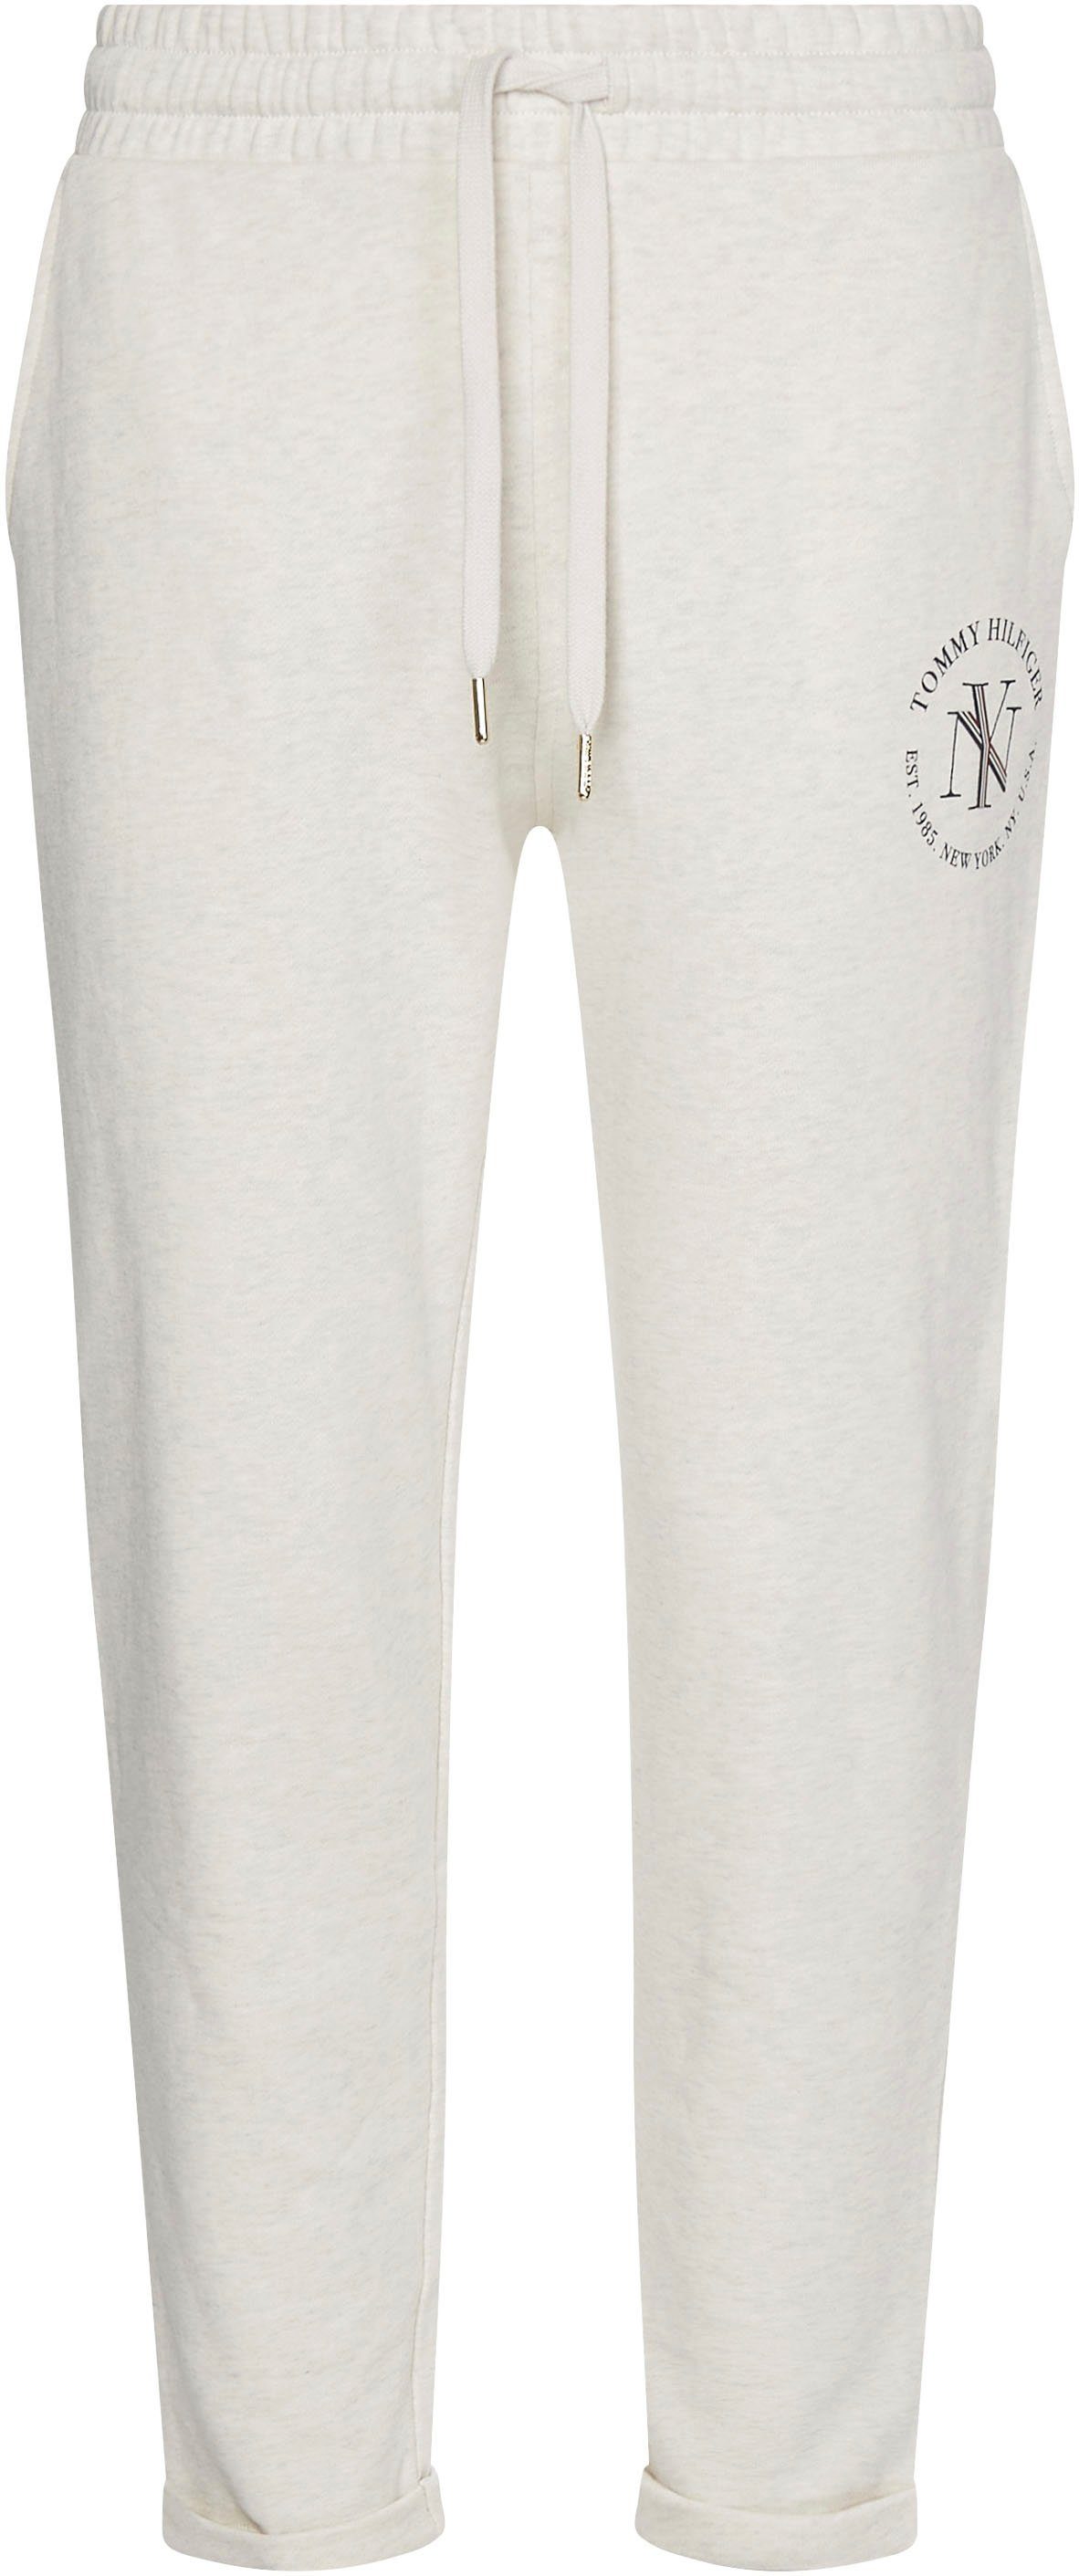 Tommy Hilfiger Sweatpants White-Heather Tommy Hilfiger Markenlabel ROUNDALL NYC mit TAPERED SWEATPANTS